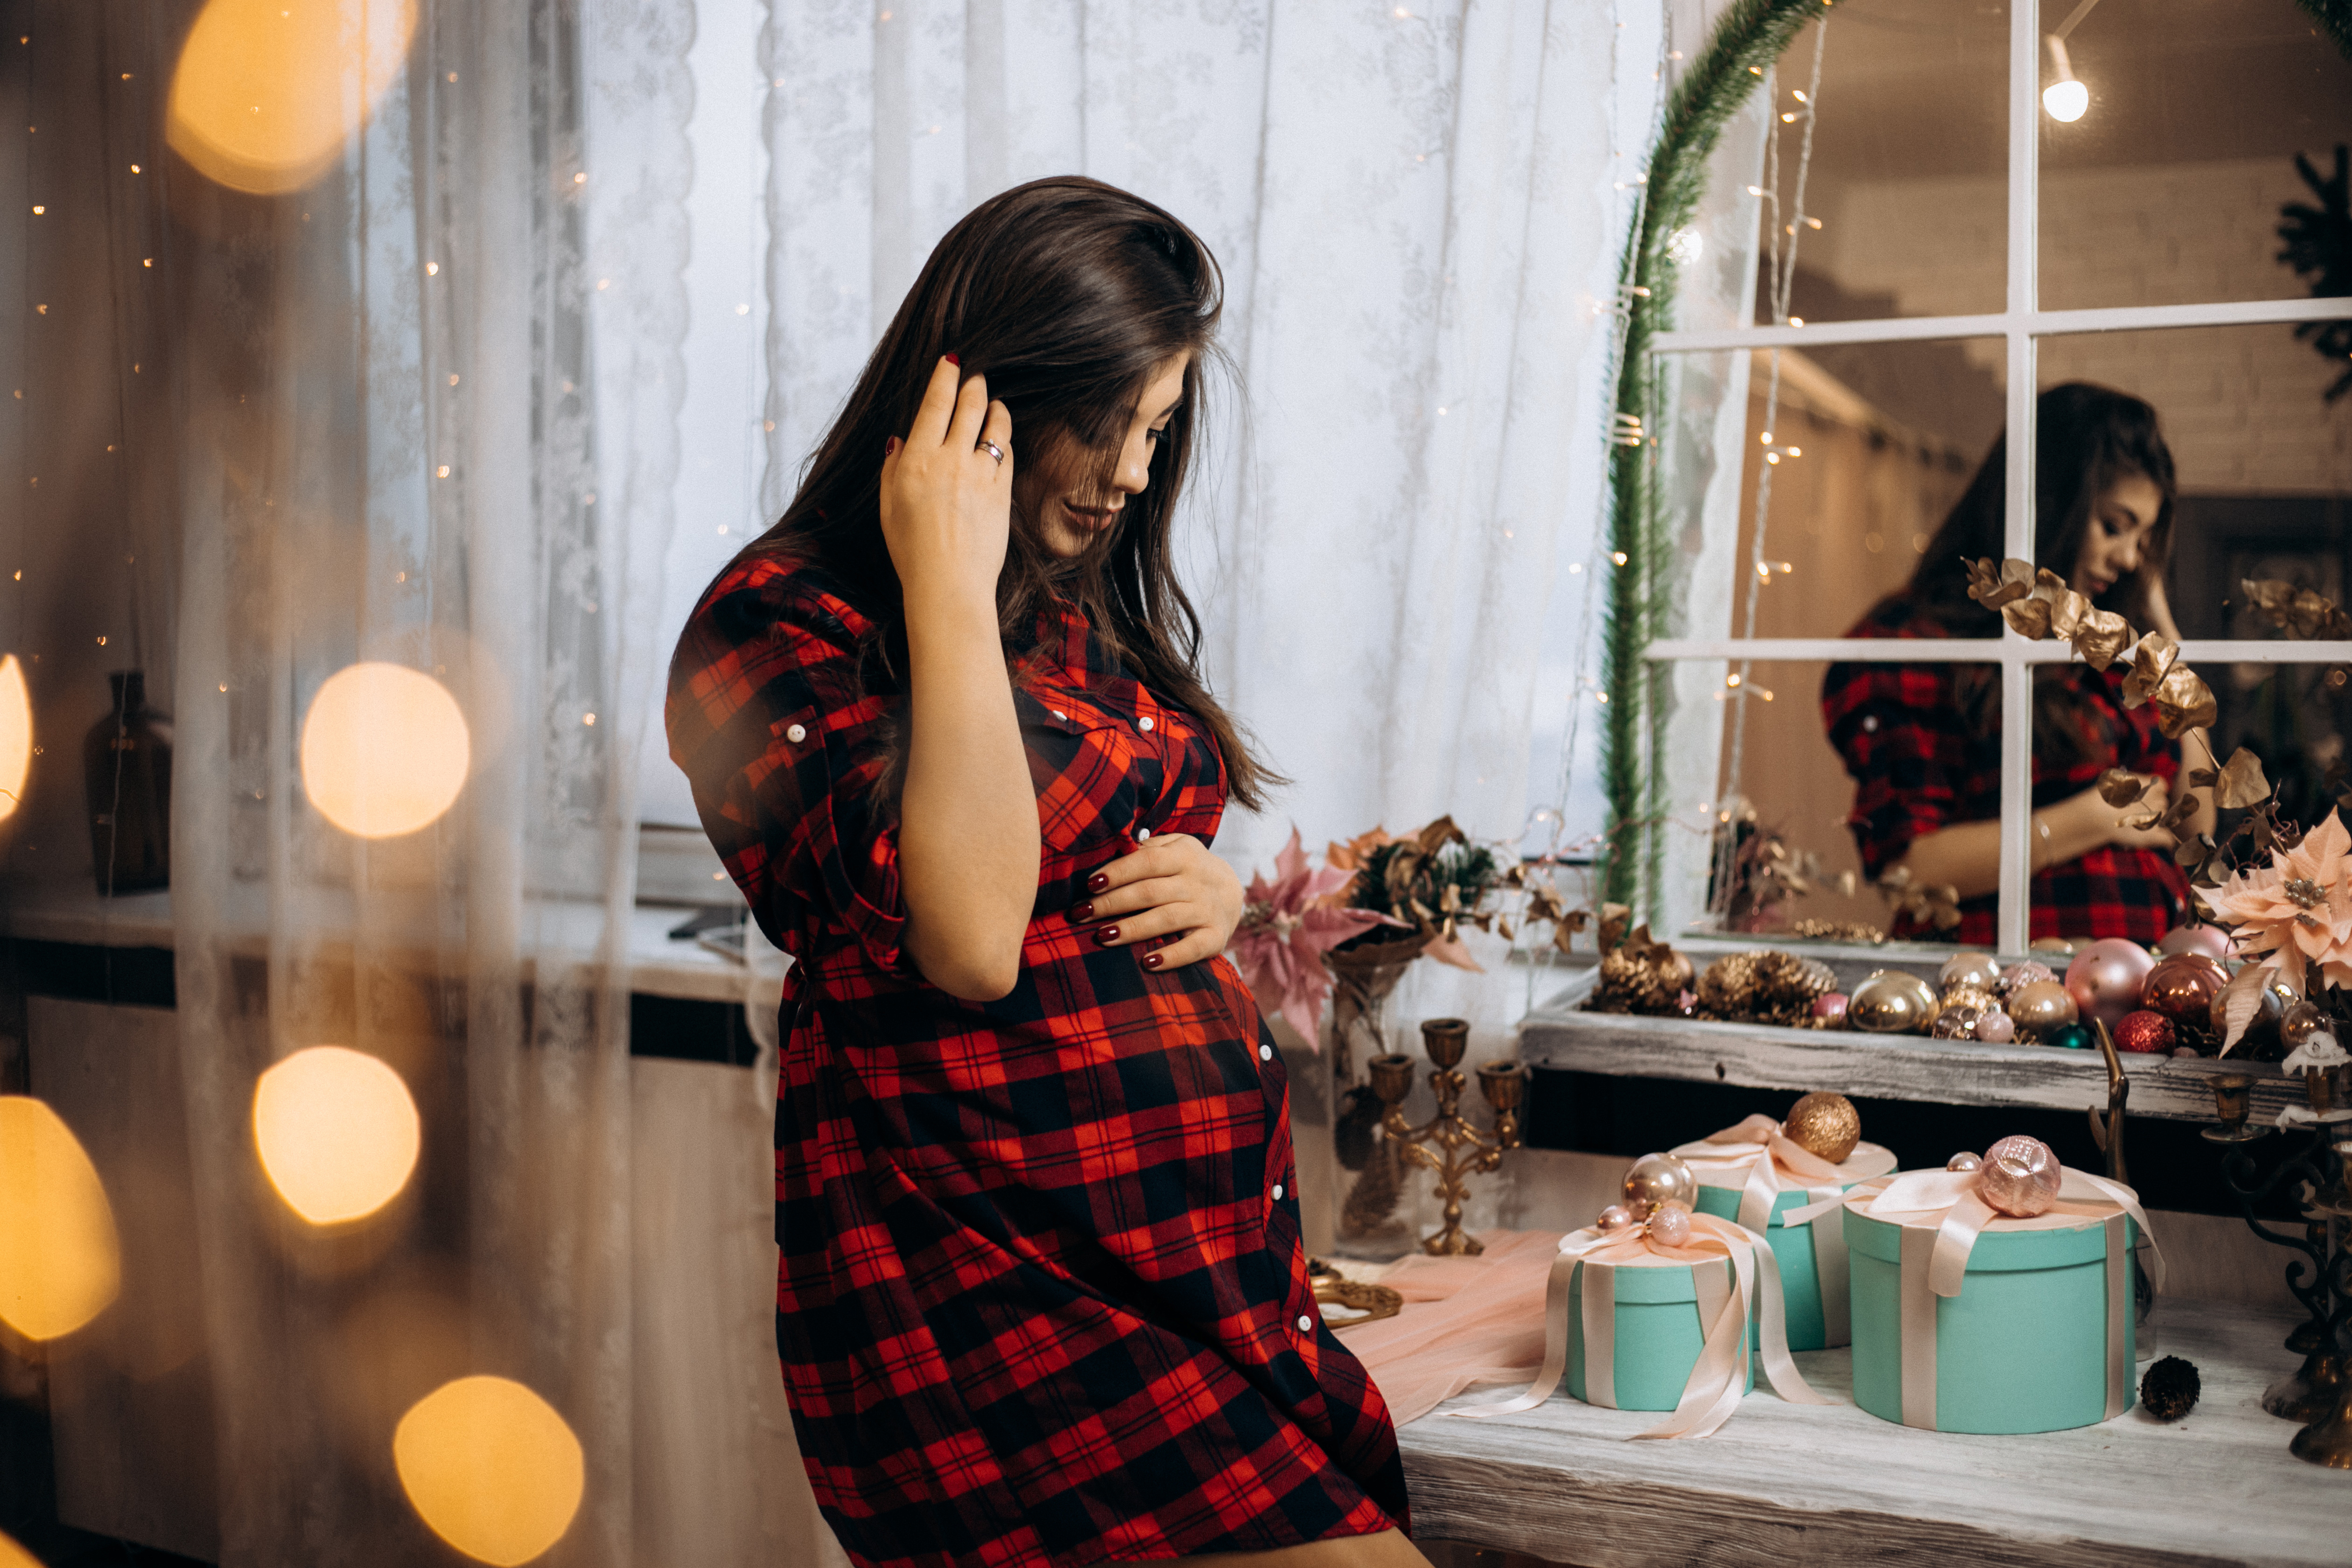 Styling Your Baby Bump: Maternity Outfit Ideas For Special